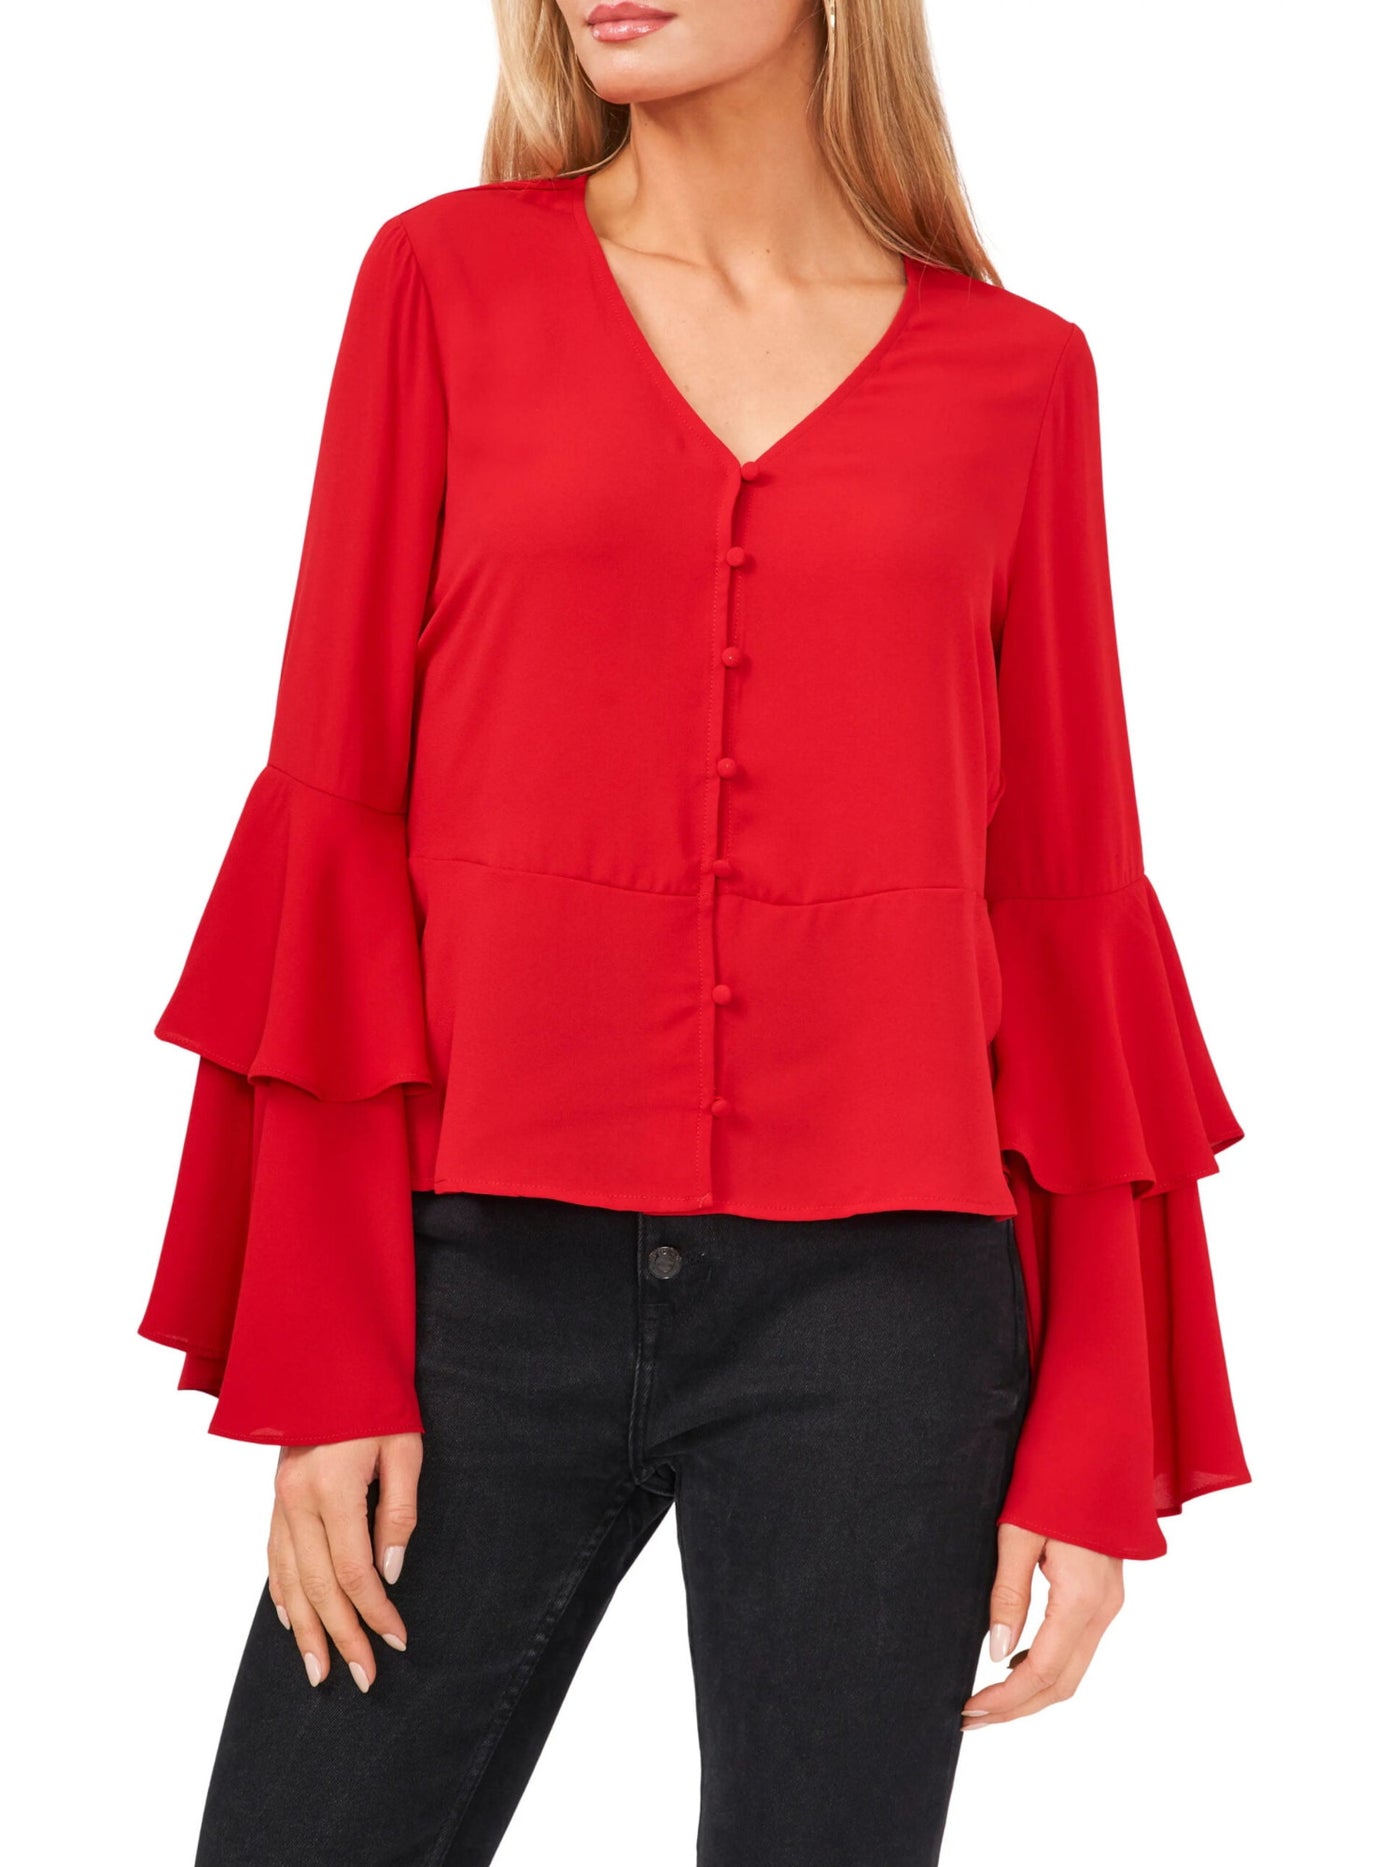 VINCE CAMUTO Womens Red Unlined Button Front Tiered Ruffled Cuff Bell Sleeve V Neck Wear To Work Peplum Top XS